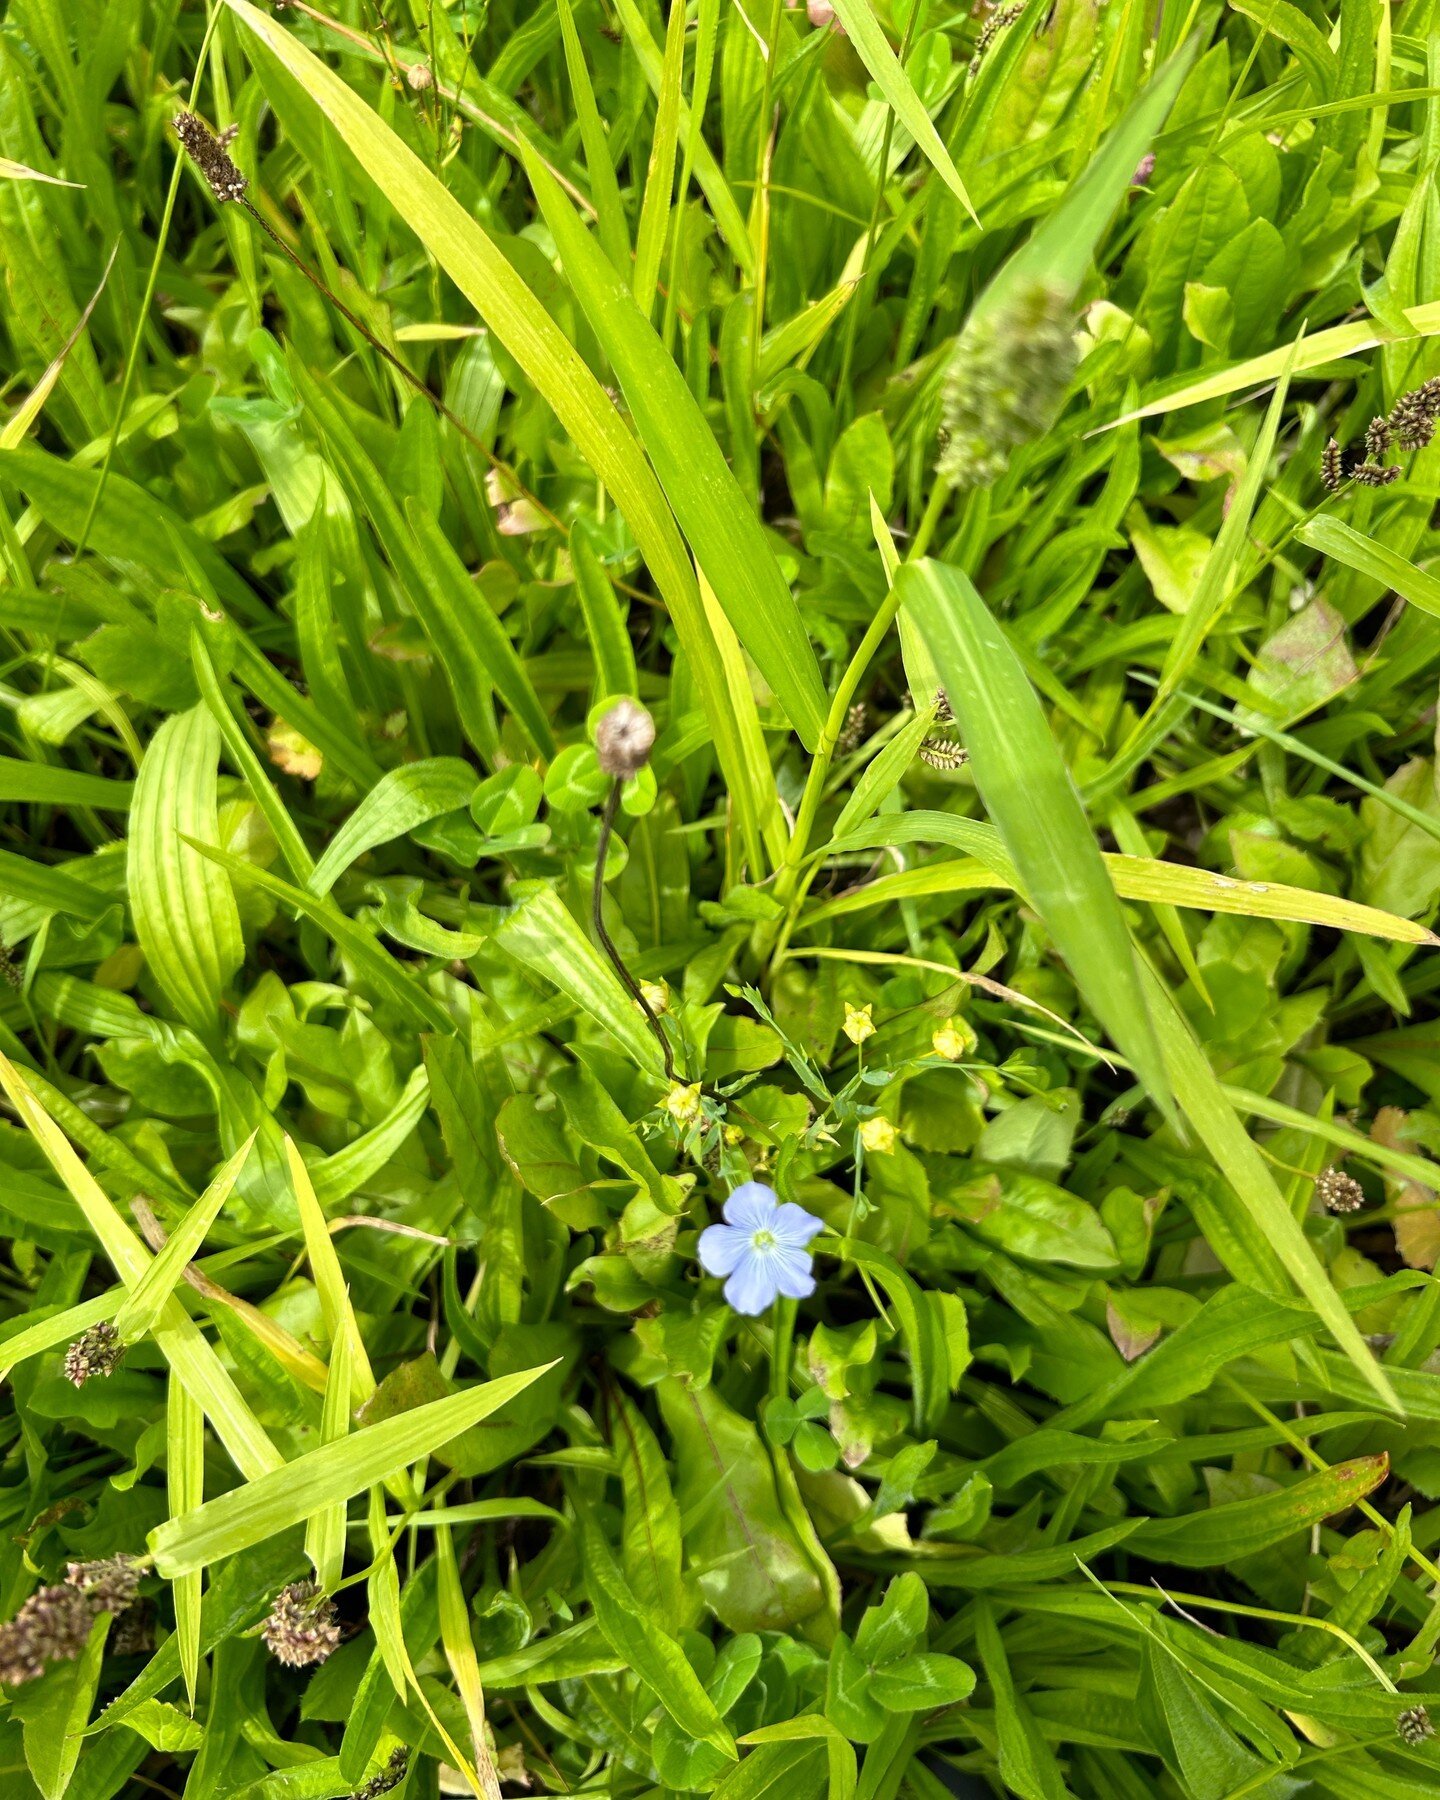 Linseed popping through and flowering in a diverse summer forage crop (from Feb 2023) 🌱💜

#covercrops #diversity #diversecovercrops #linseed #regenerativeagriculture #regenerativefarming #kiwibusiness #naturalperformanceltd